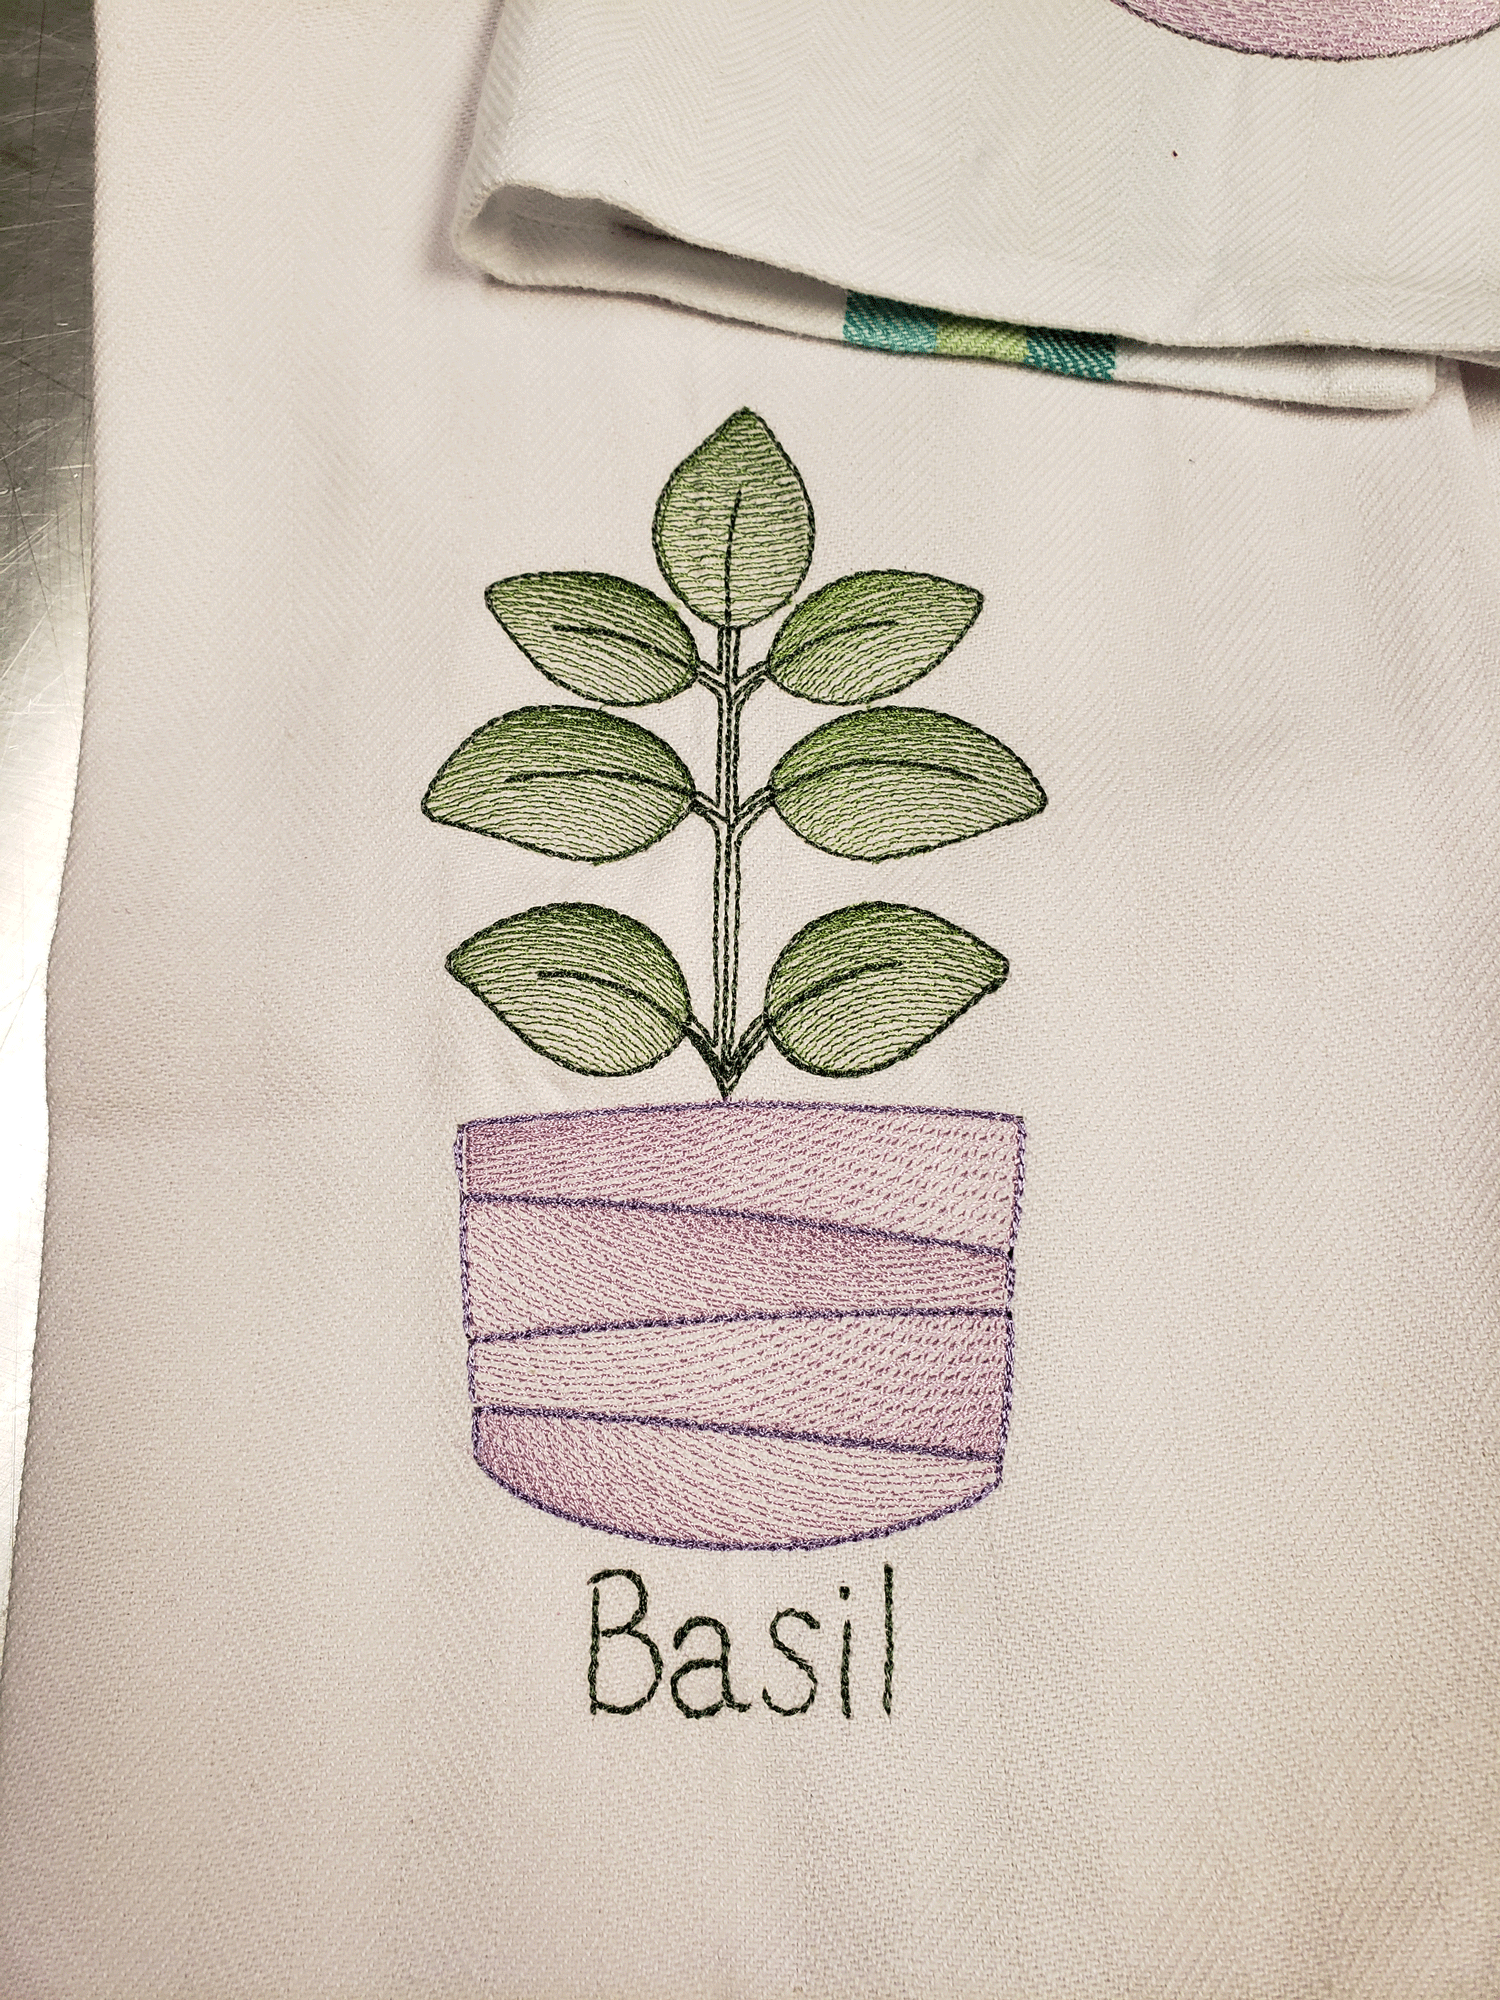 https://diannesews.com/wp-content/uploads/2021/02/embroidered-kitchen-towel-basil.png